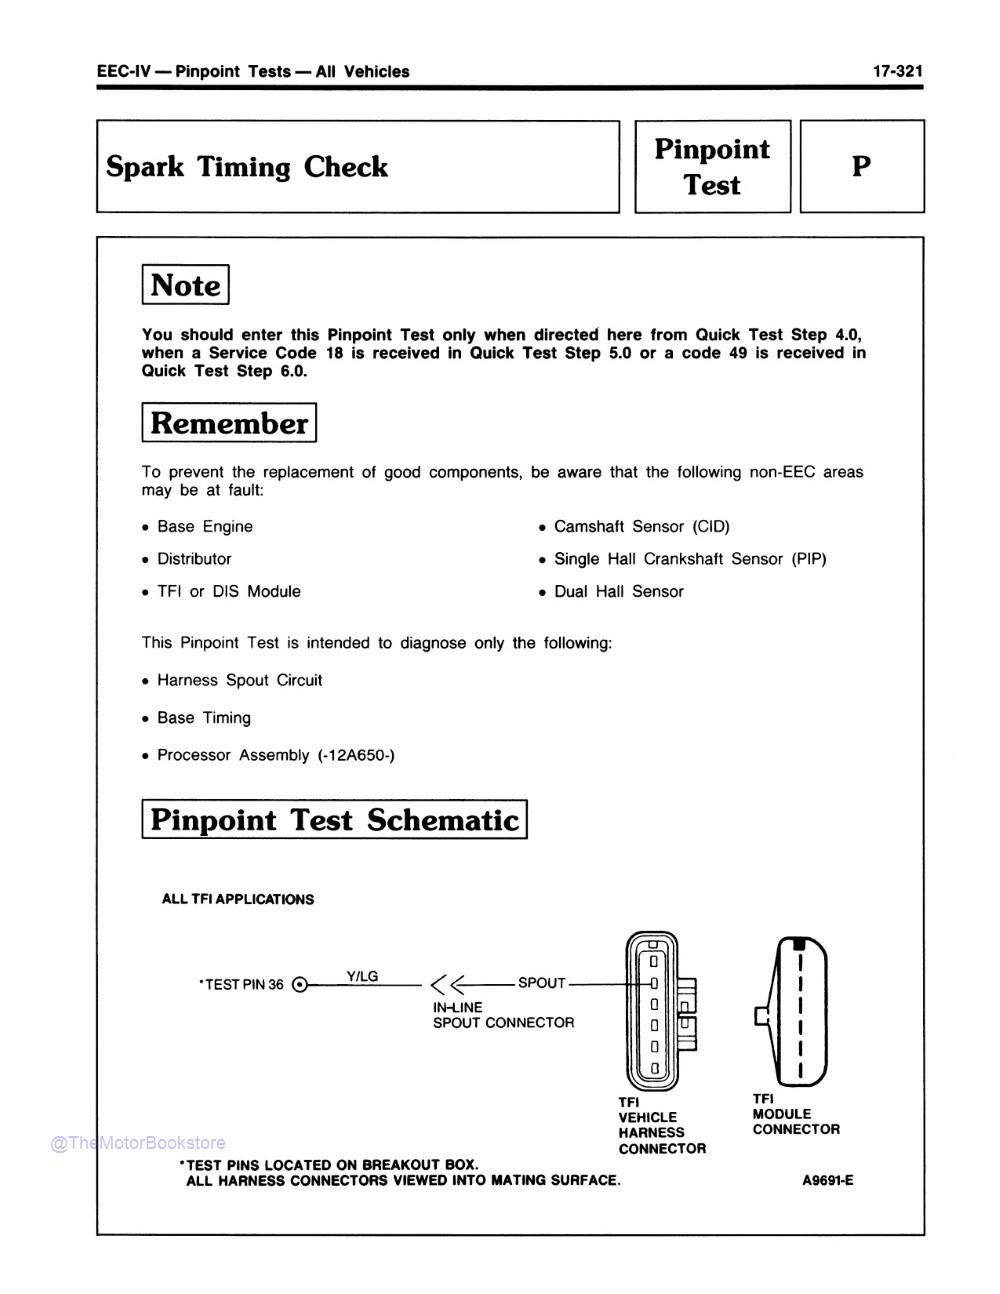 1989 Ford Car / Truck Emissions Diagnosis Shop Manual - Sample Page 2